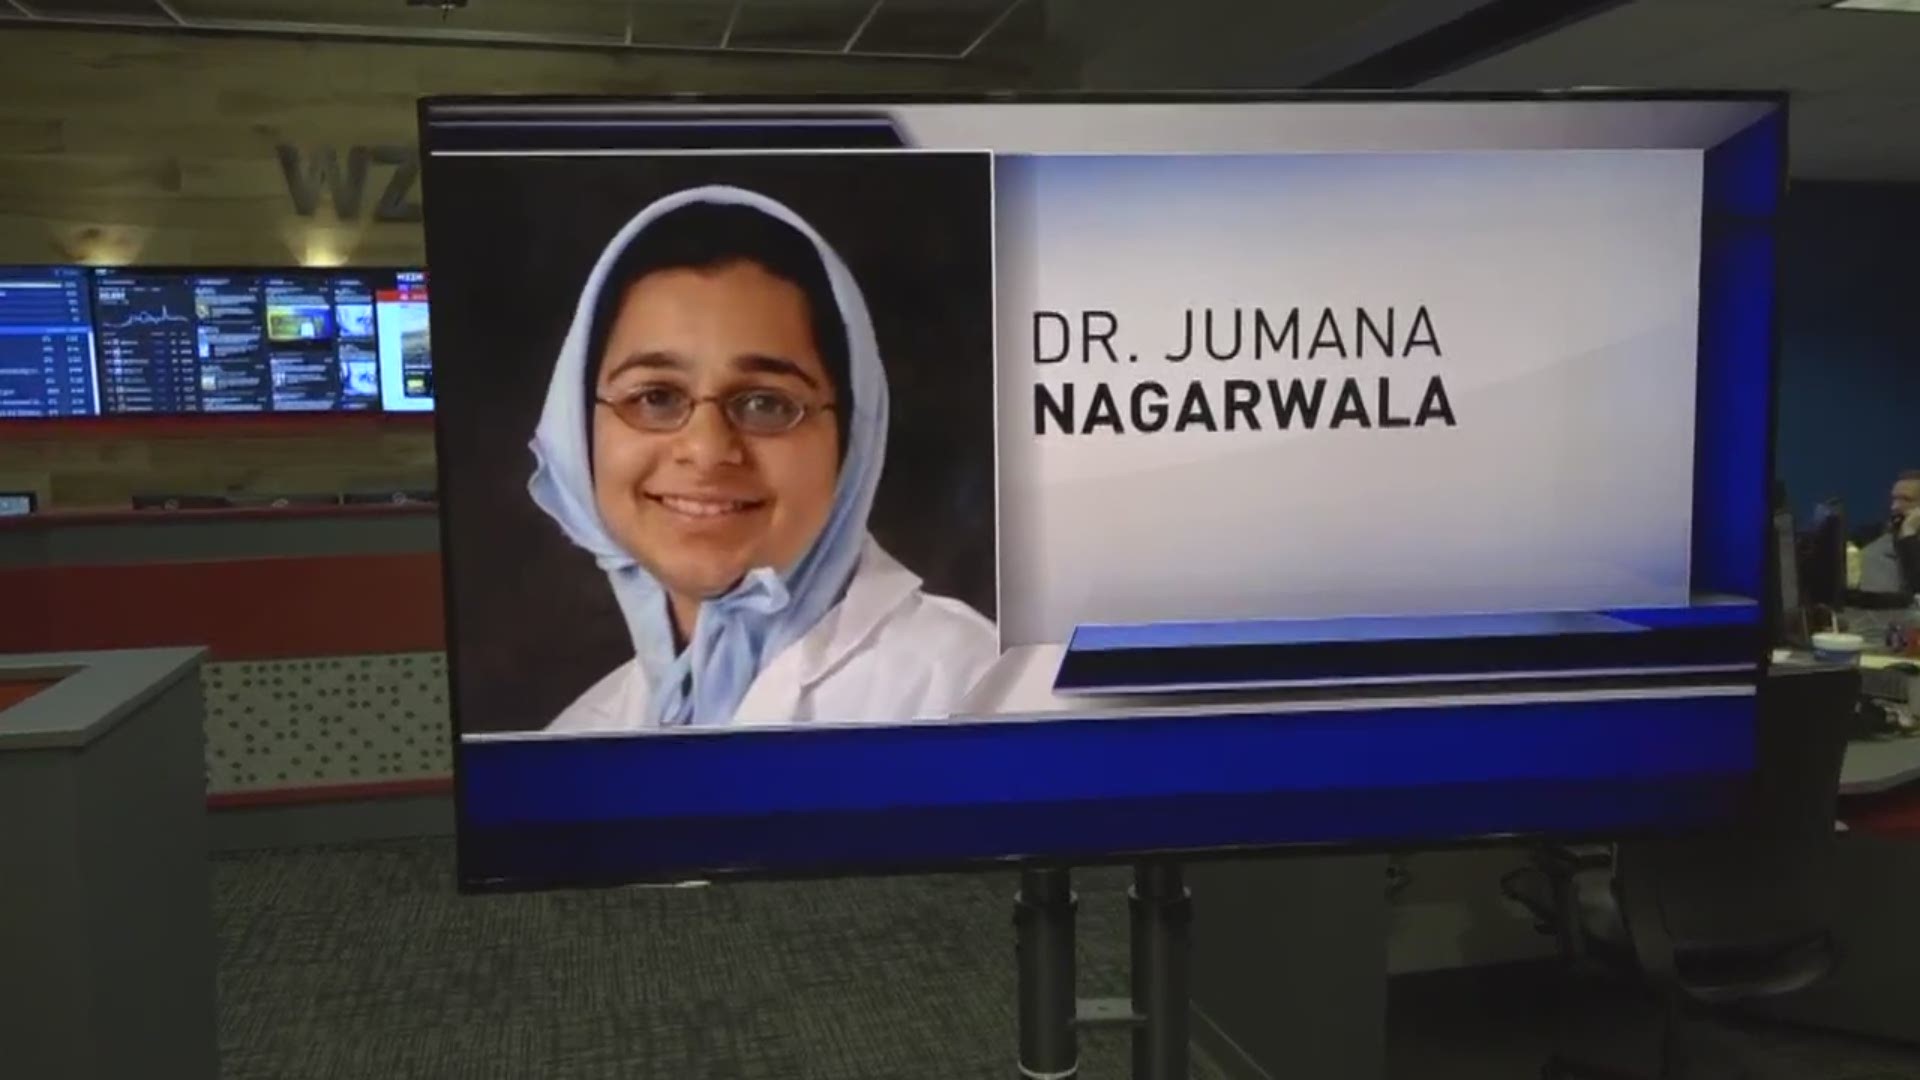 Jumana Nagarwala is a member of a religious and cultural community that practices genital mutilation on young girls but in the U.S. the practice is punishable by up to five years in prison.